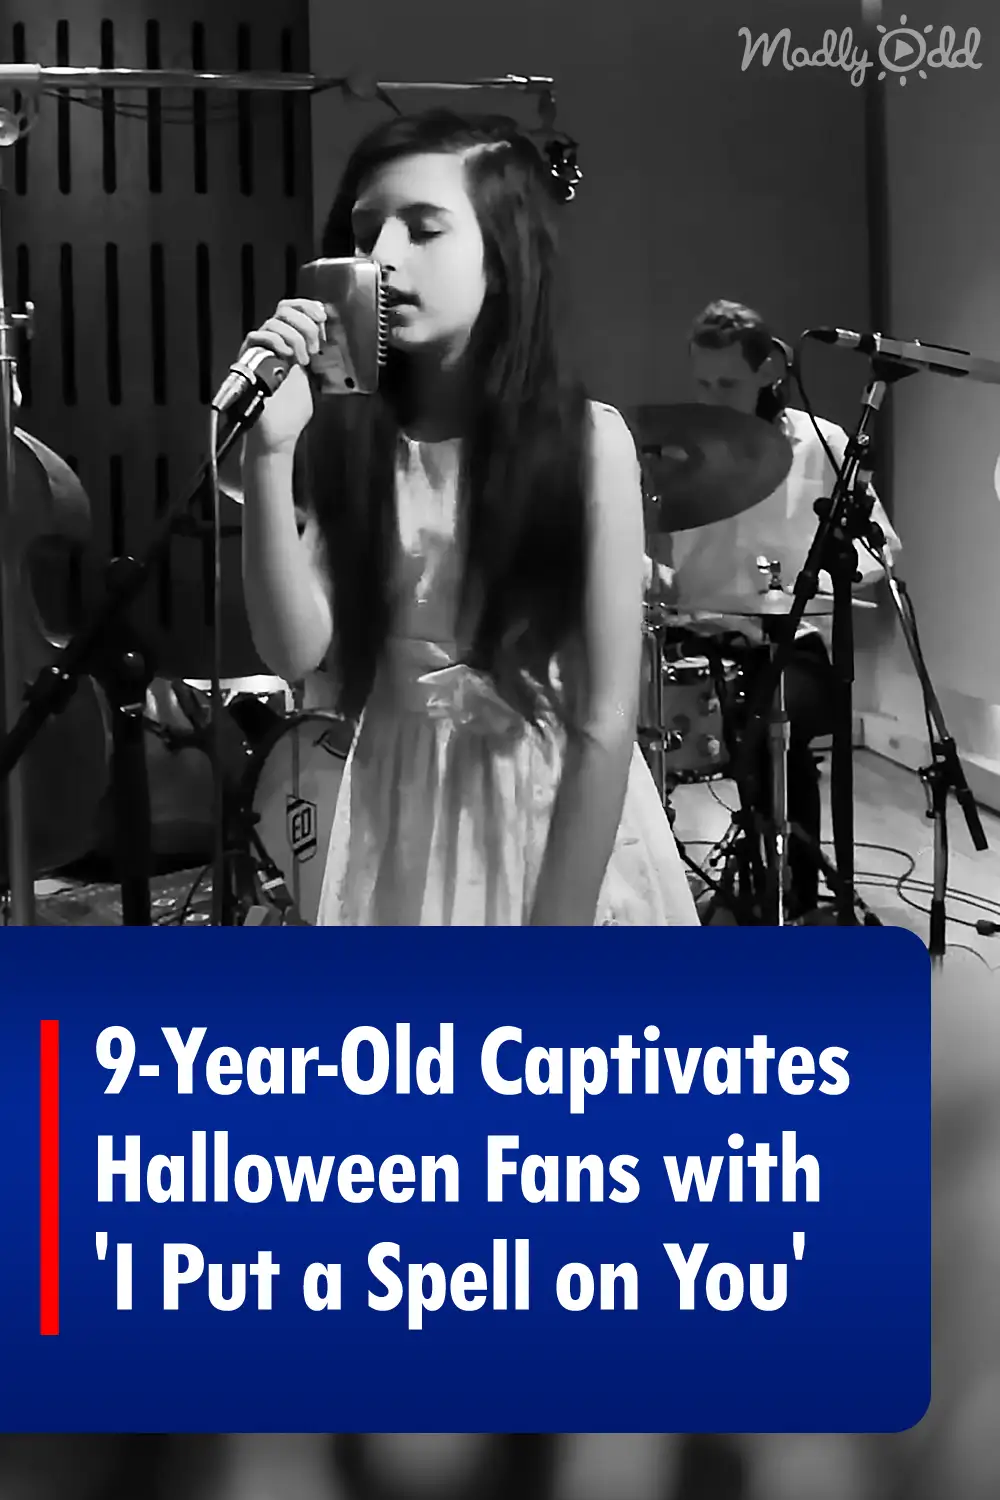 9-Year-Old Captivates Halloween Fans with \'I Put a Spell on You\'